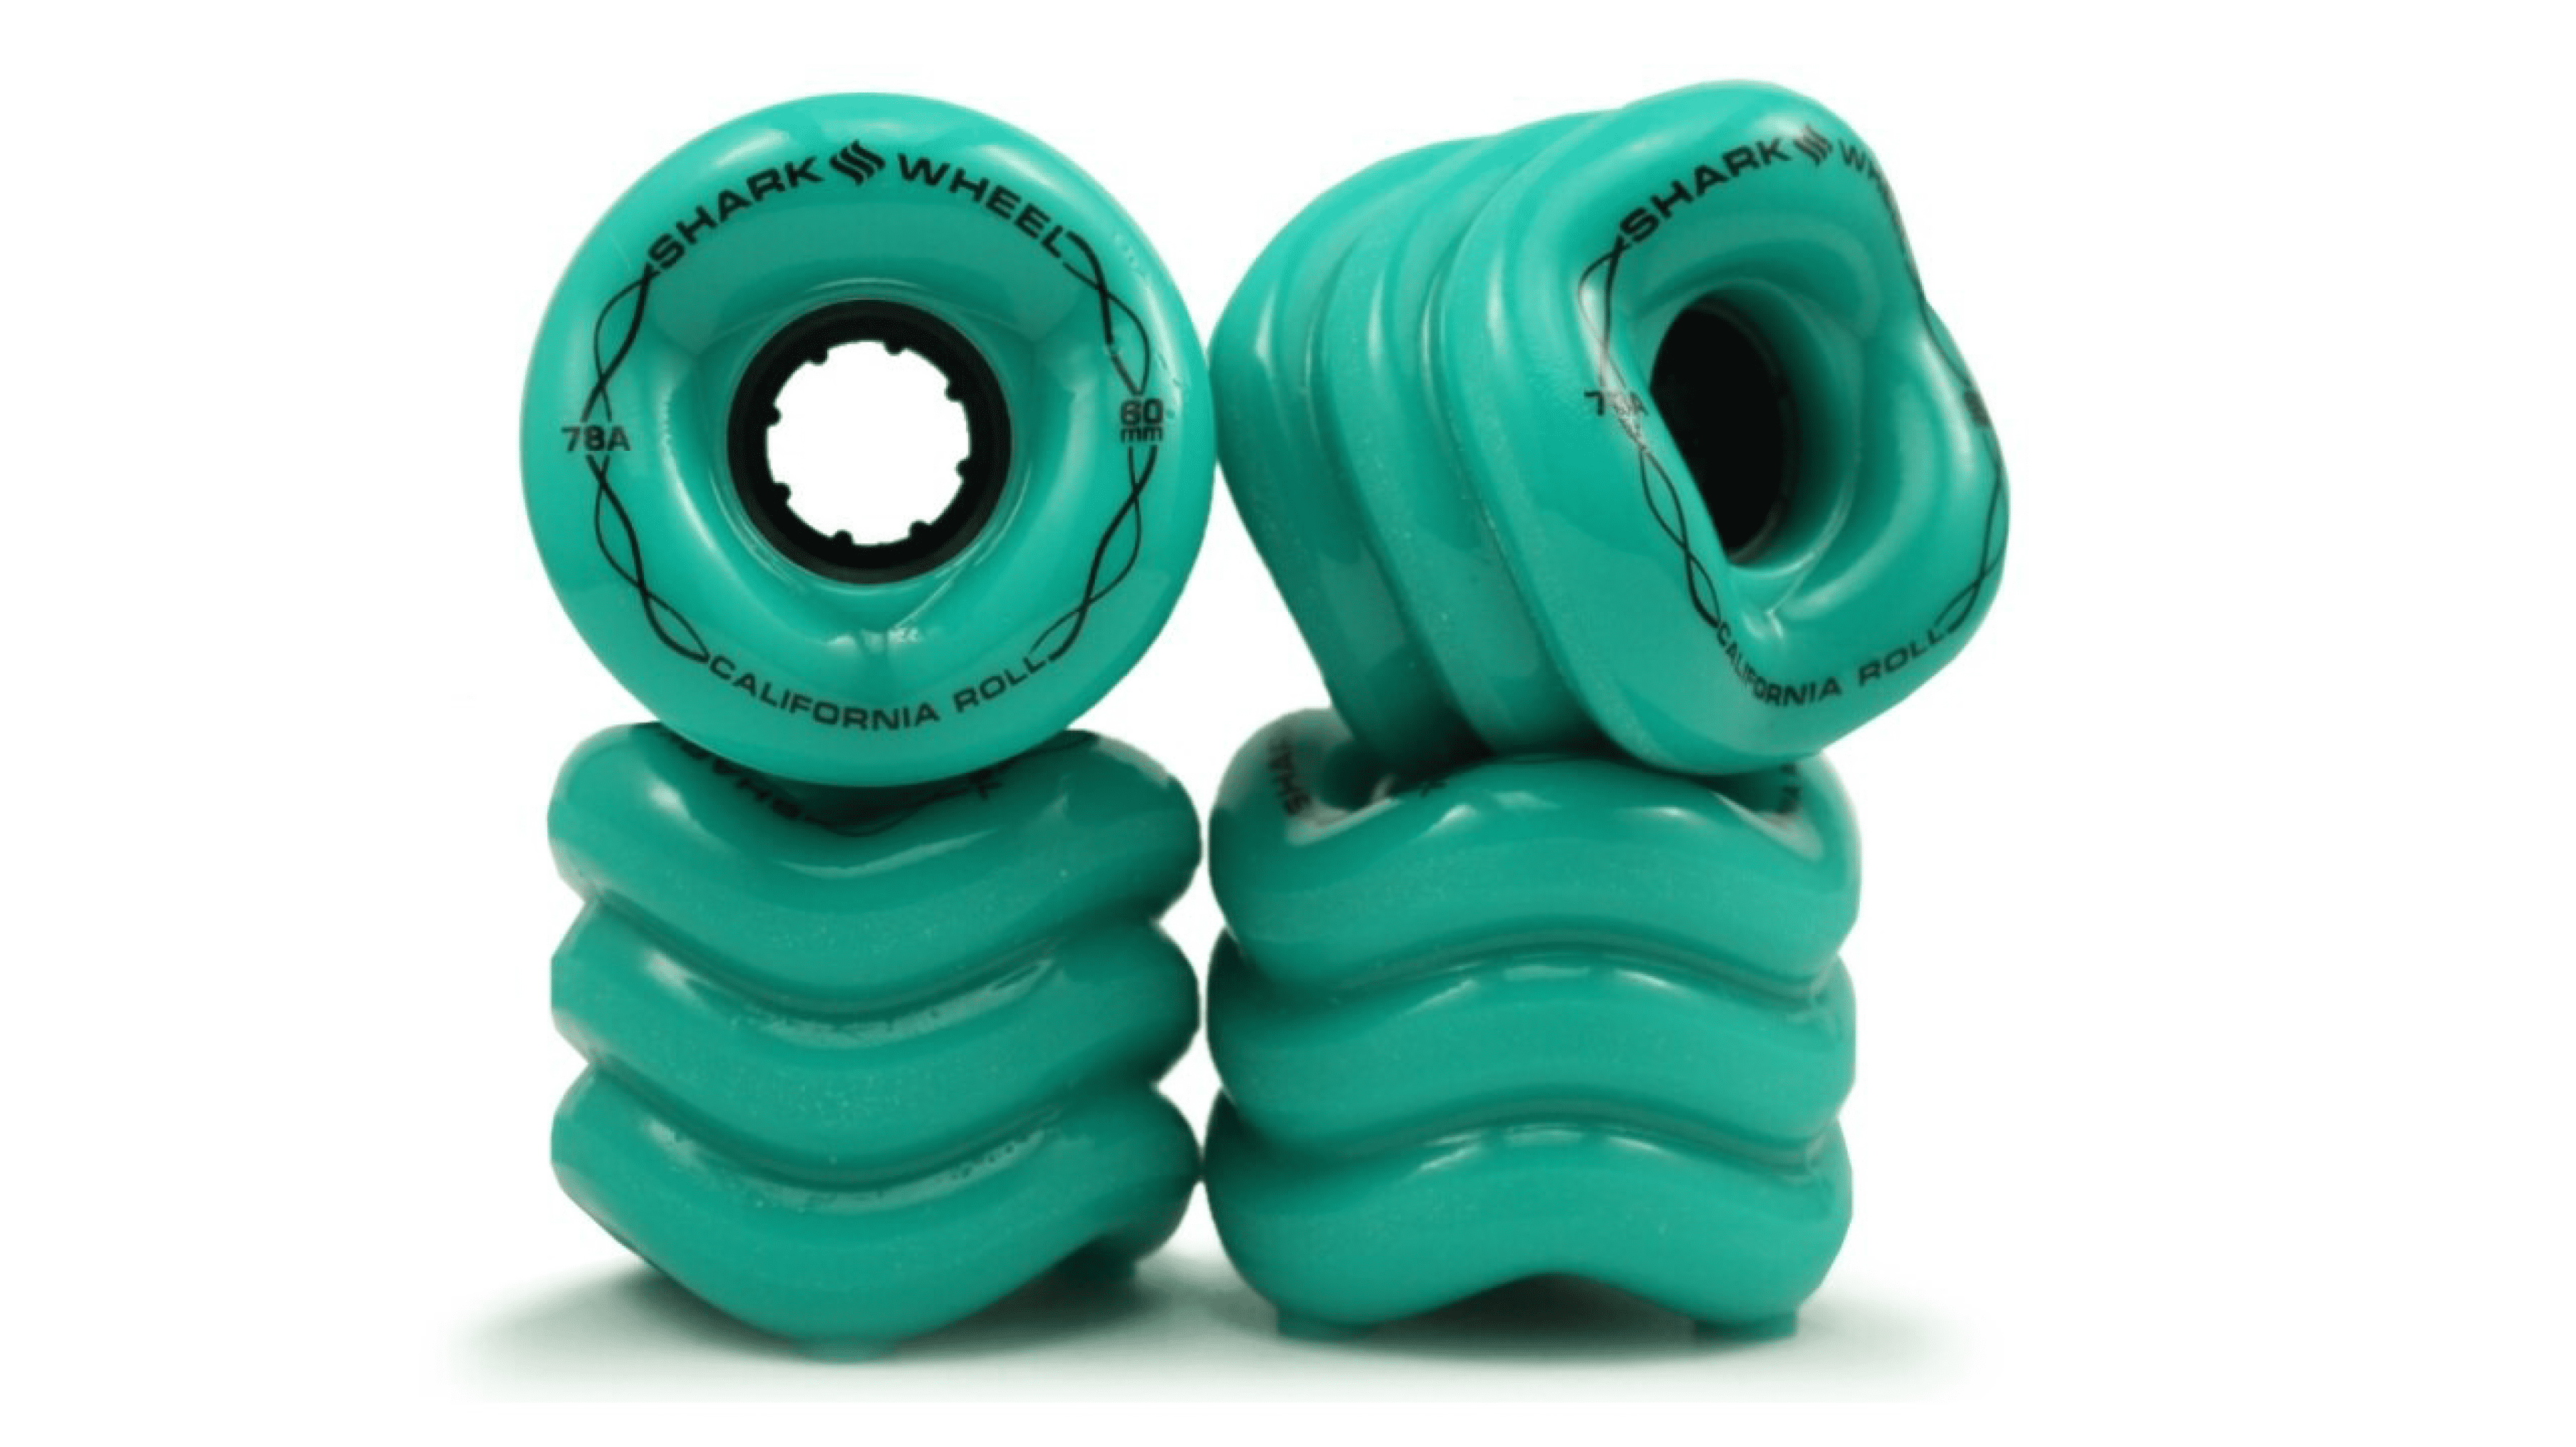 Perfect for Cruising and Carving Set of 4 Longboard Wheels with ABEC-7 Bearings Included Shark Wheels 72MM 78A 